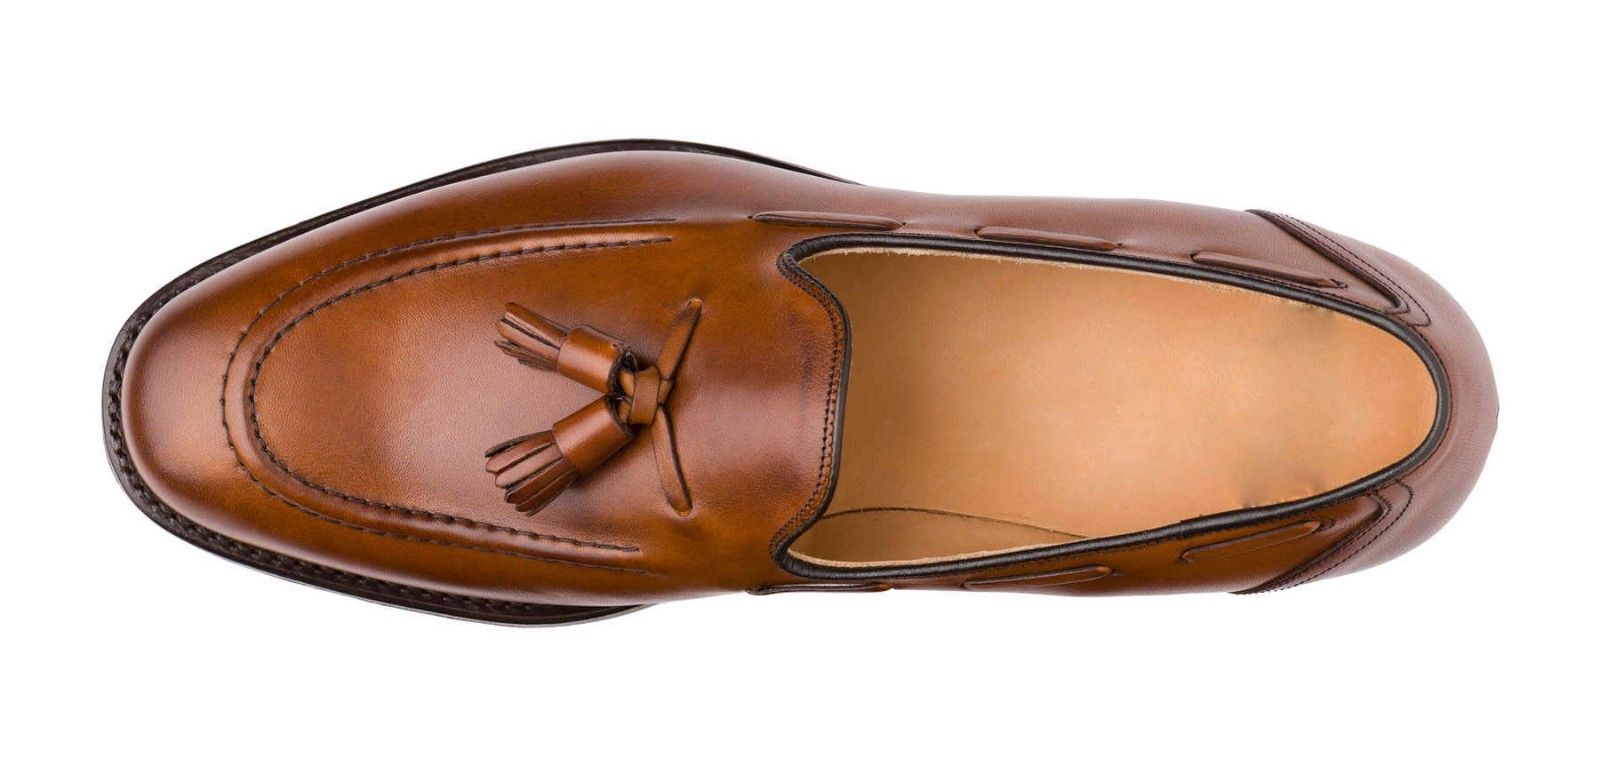 mens tan slip on loafers